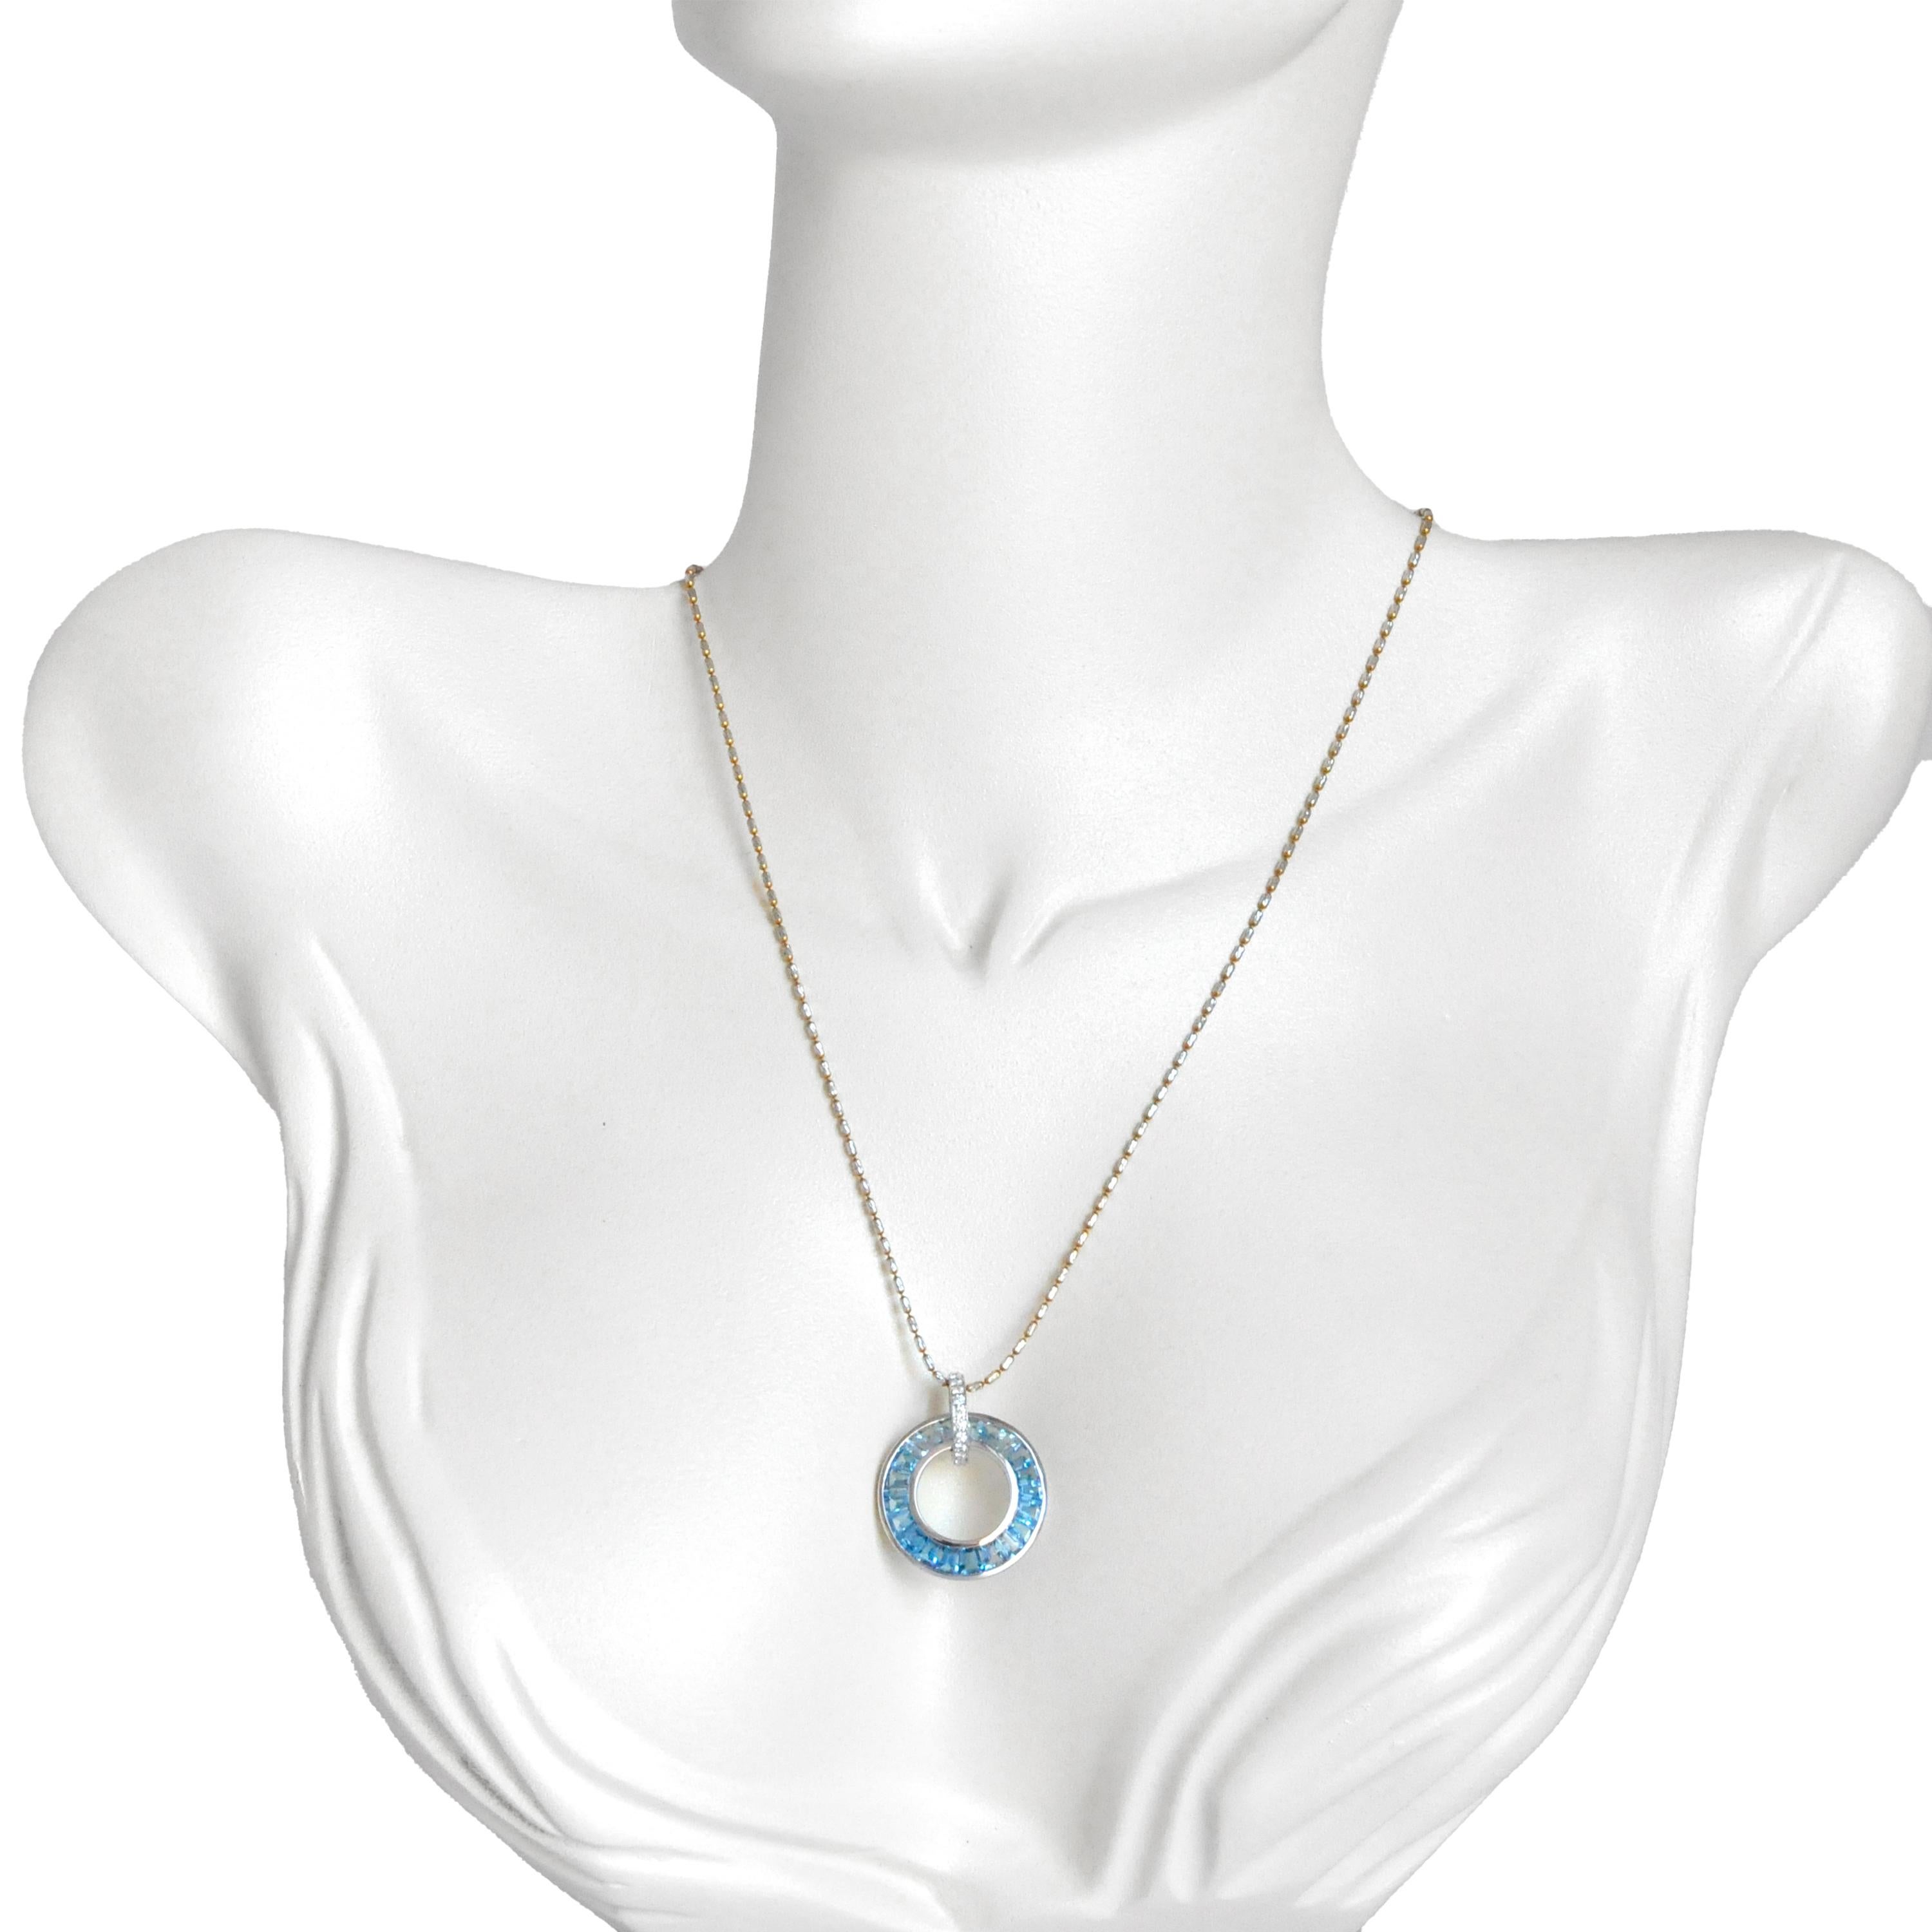 Adorn your neck with our exquisite 18K White Gold Blue Topaz Diamond Circle Pendant Necklace, a true embodiment of elegance. The pendant features a mesmerizing blue topaz stone, expertly cut into tapered baguettes, each set in a stunning channel